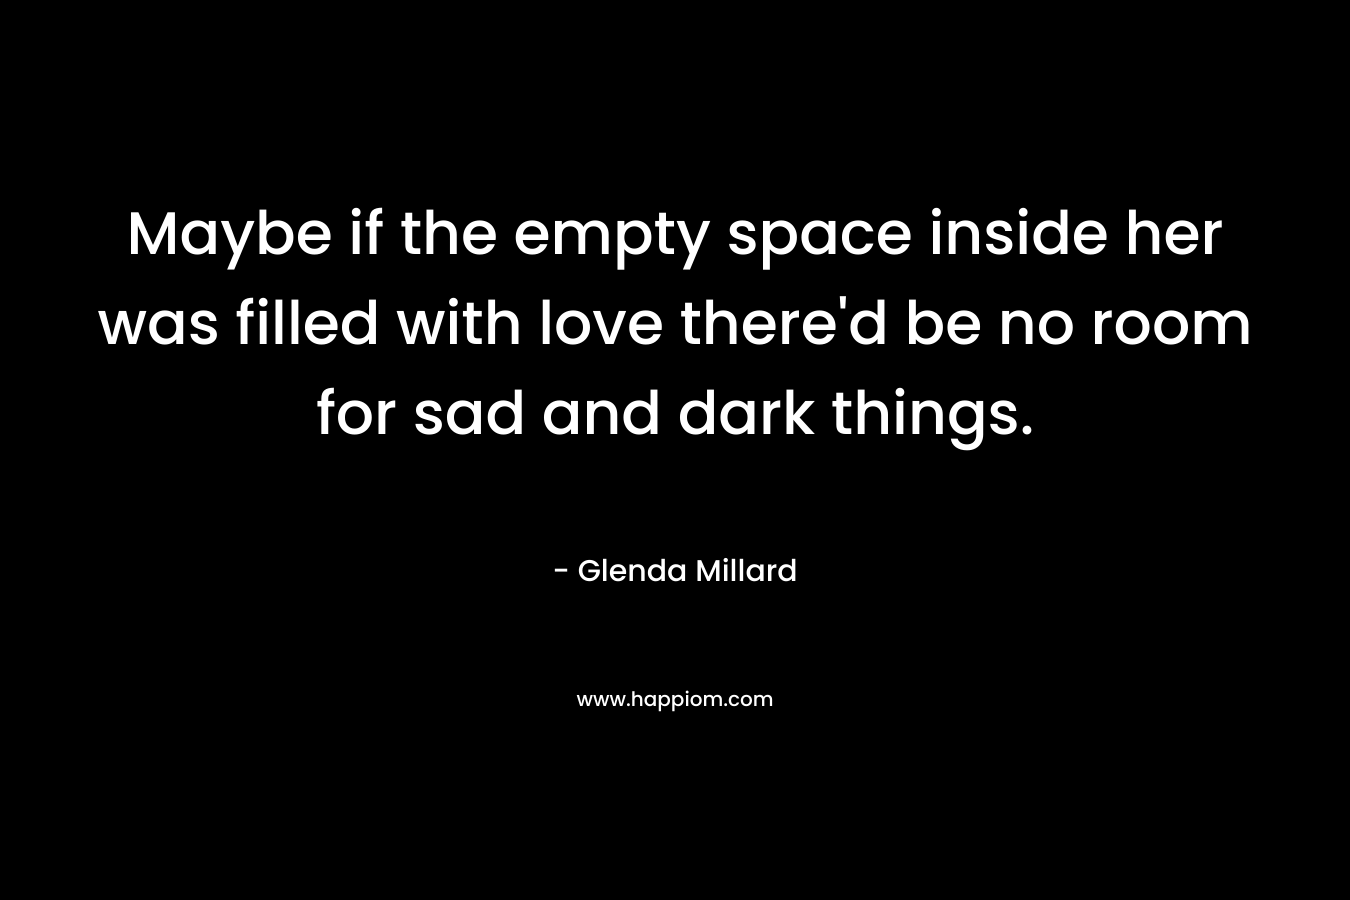 Maybe if the empty space inside her was filled with love there’d be no room for sad and dark things. – Glenda Millard